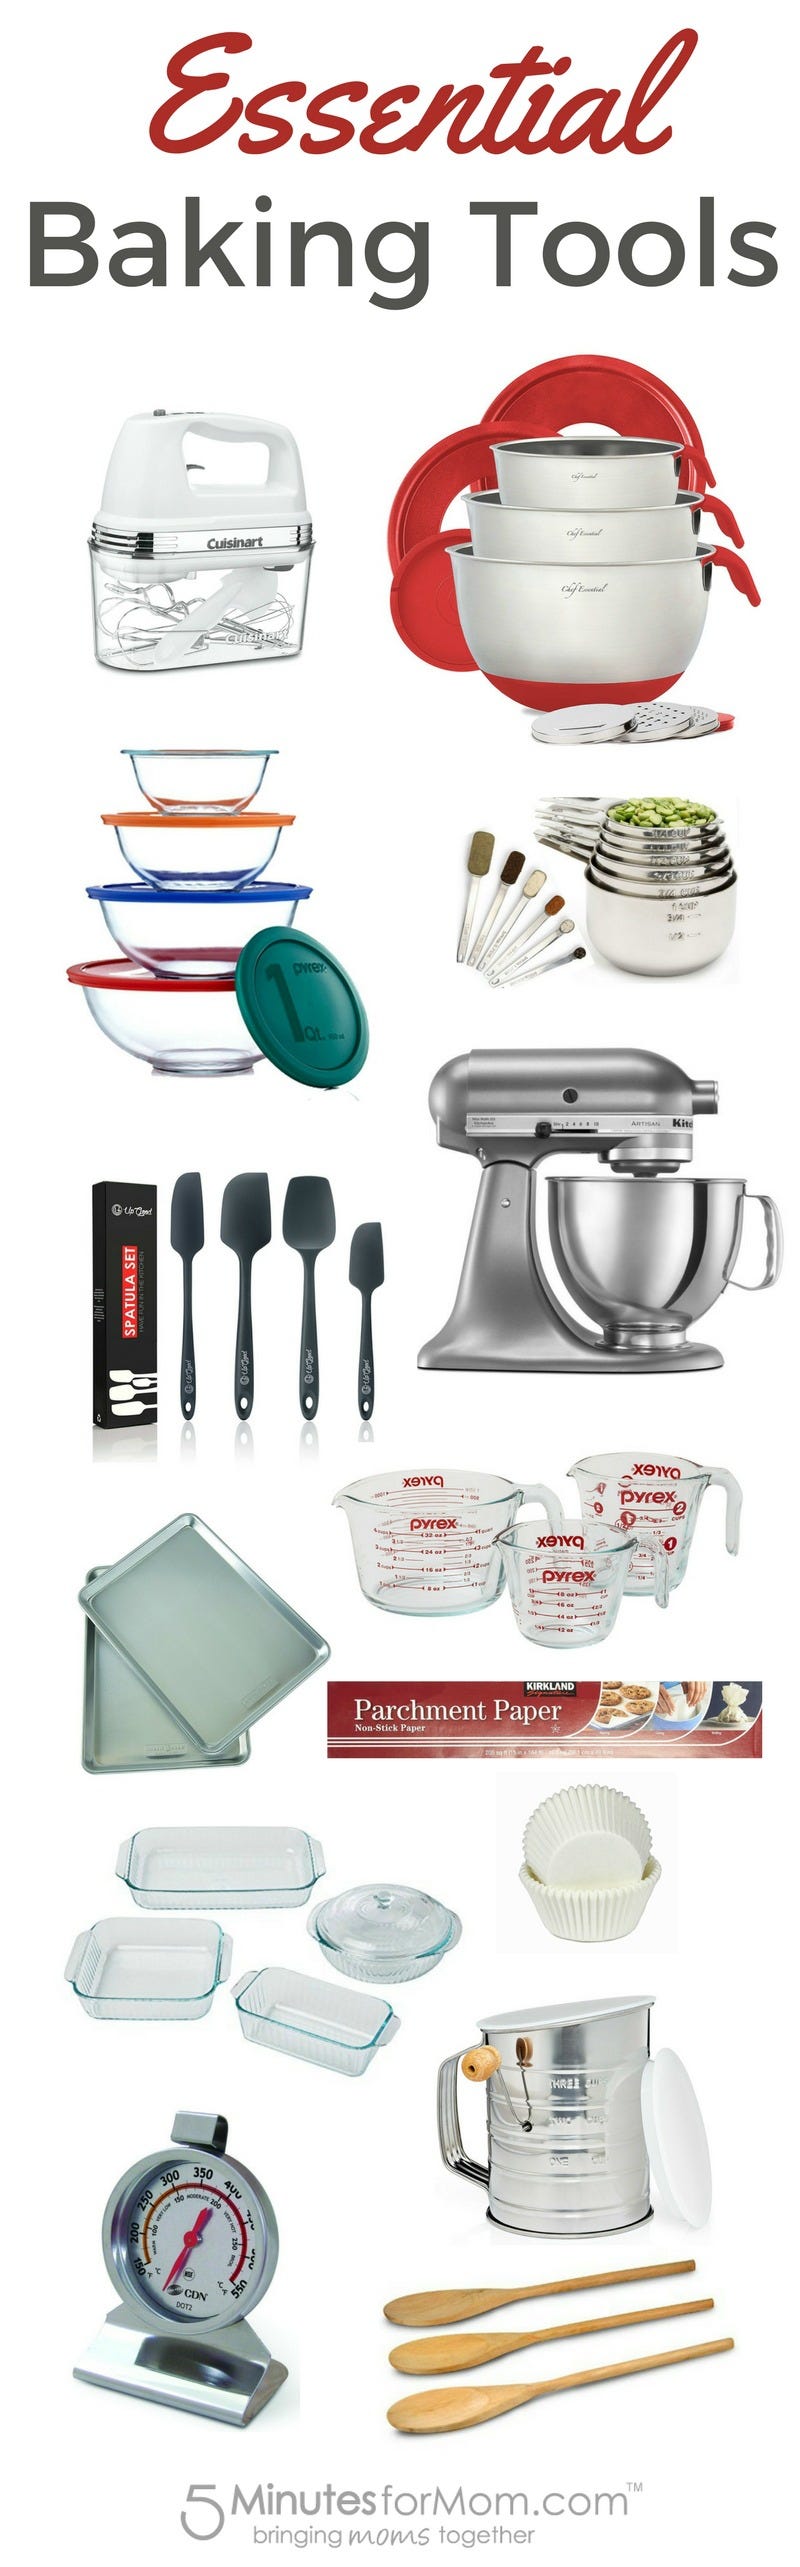 Essential Baking Tools and Equipment